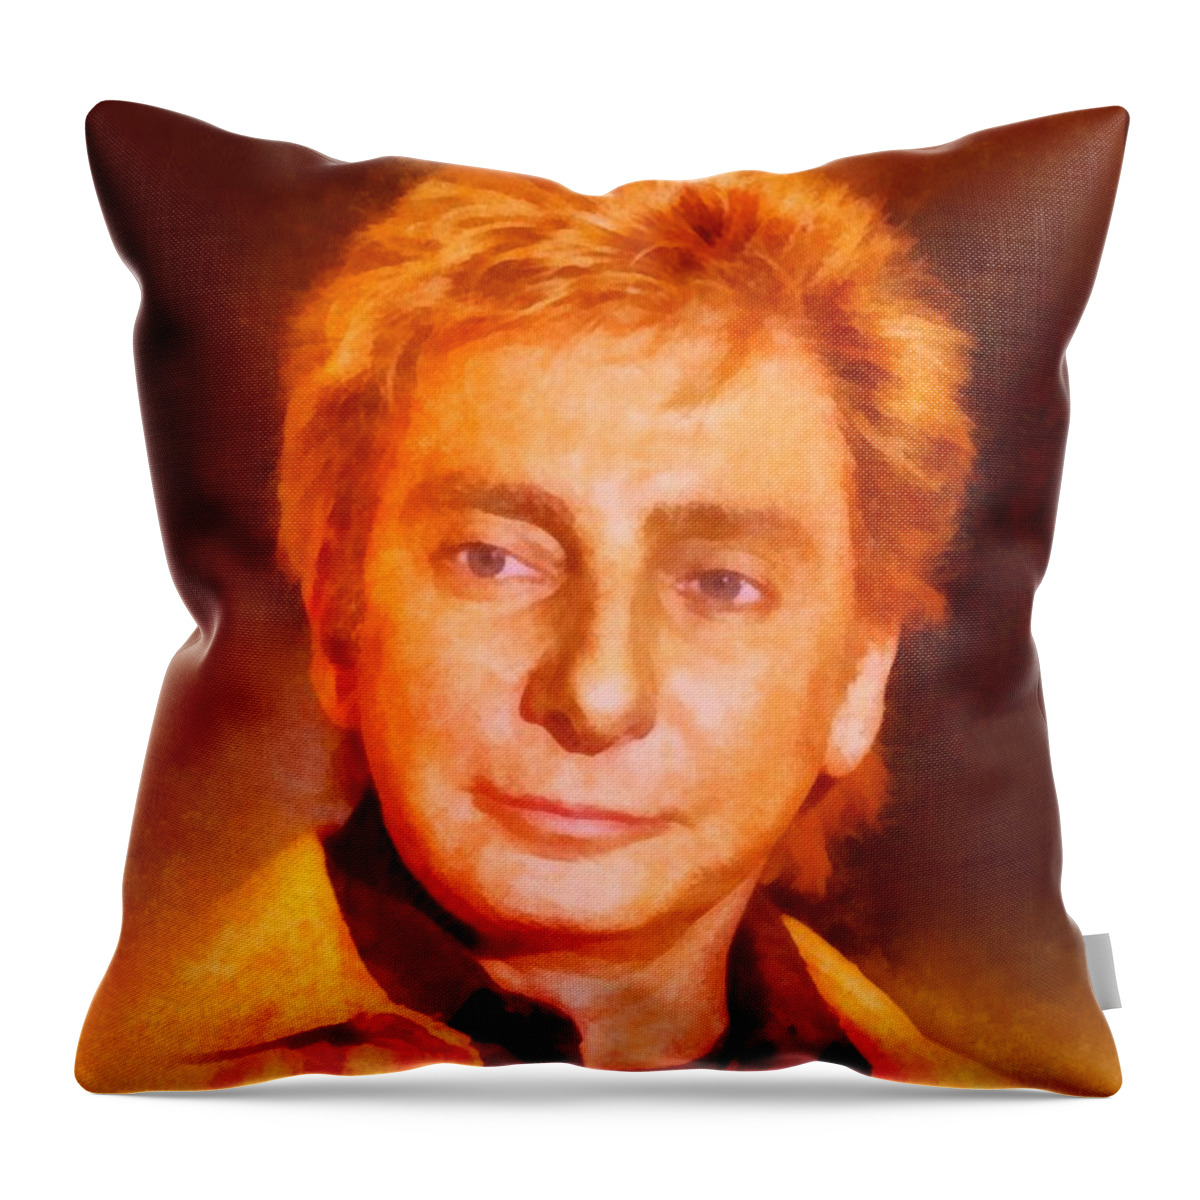 Hollywood Throw Pillow featuring the painting Barry Manilow by John Springfield by Esoterica Art Agency